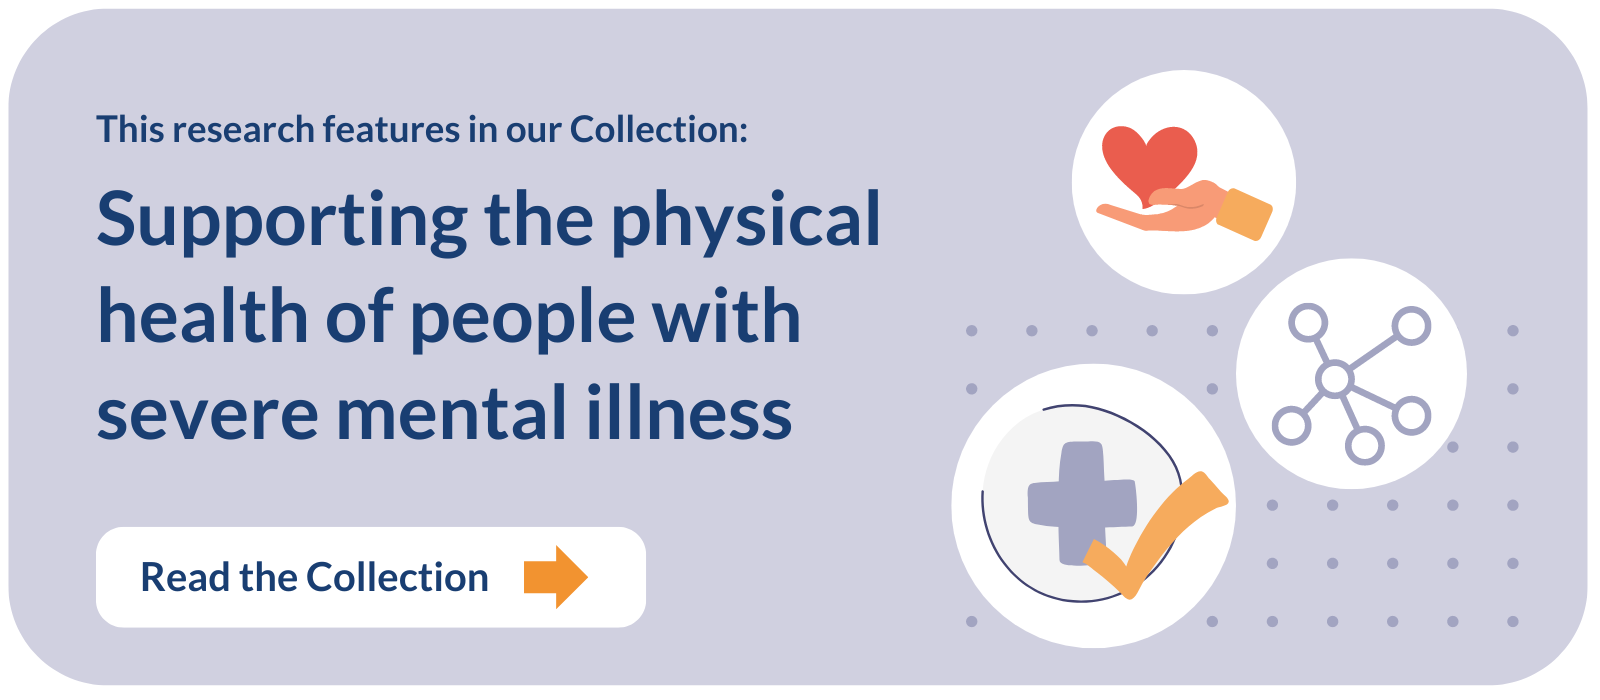 This research features in our Collection: Supporting the physical health of people with severe mental illness. Read the Collection